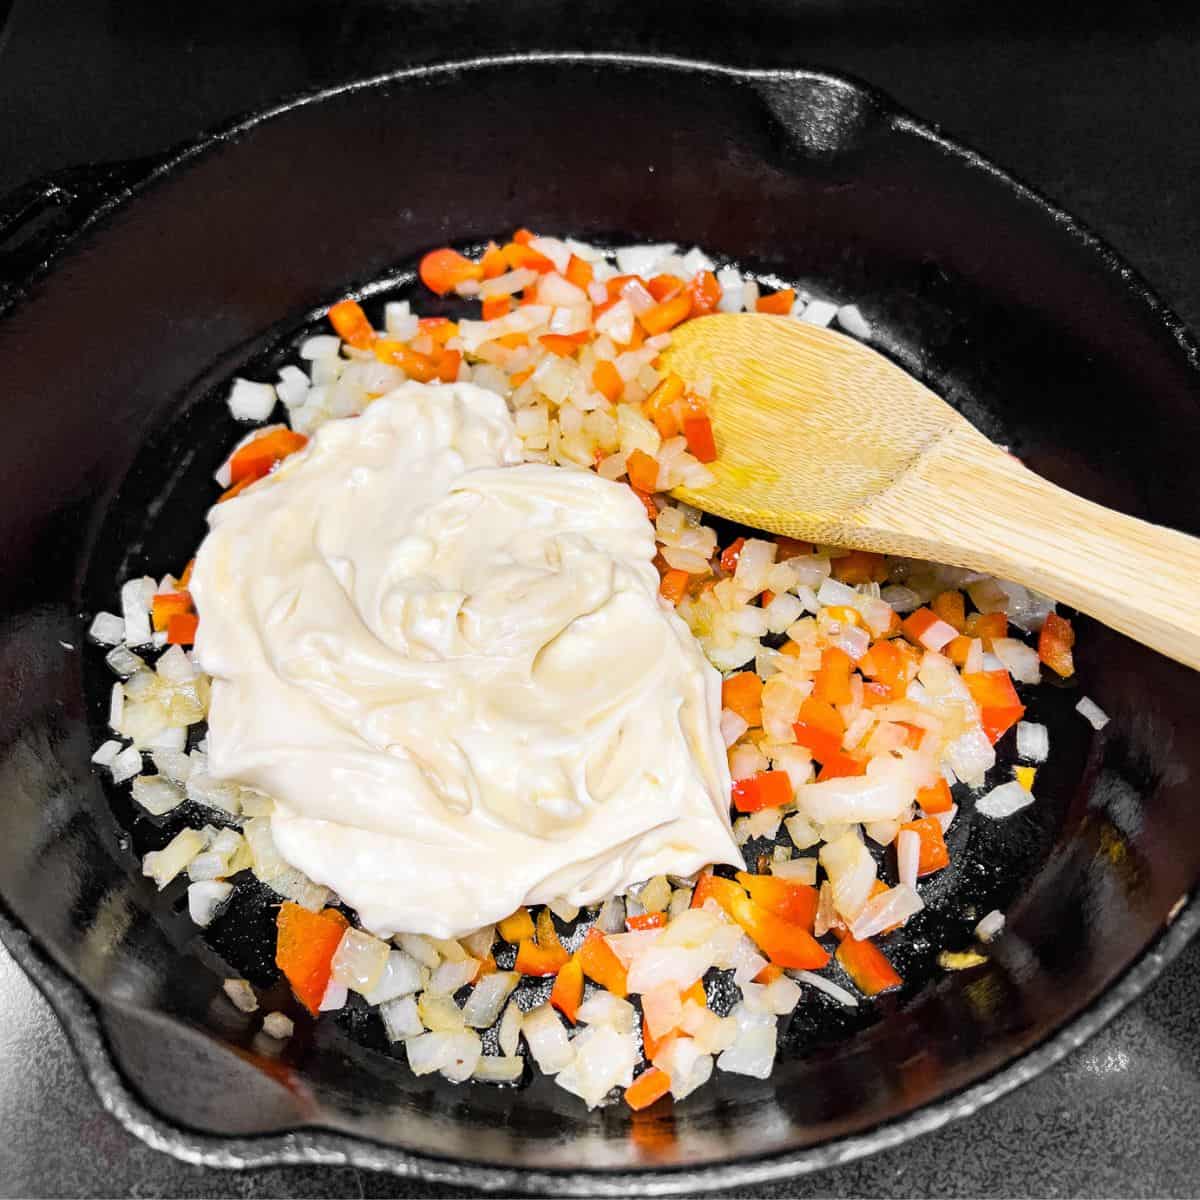 Adding mayonnaise mixture into the skillet.